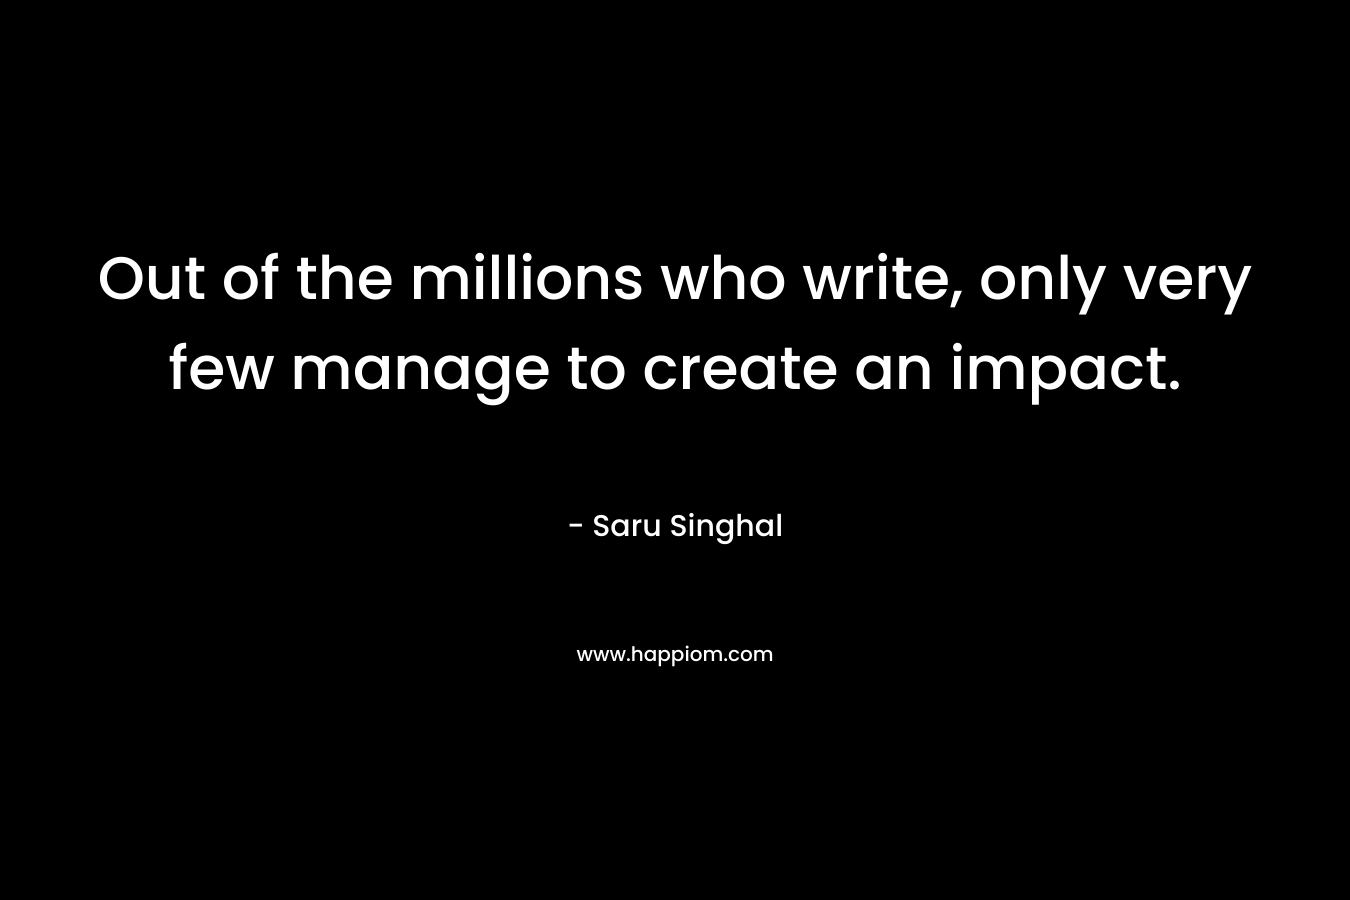 Out of the millions who write, only very few manage to create an impact.